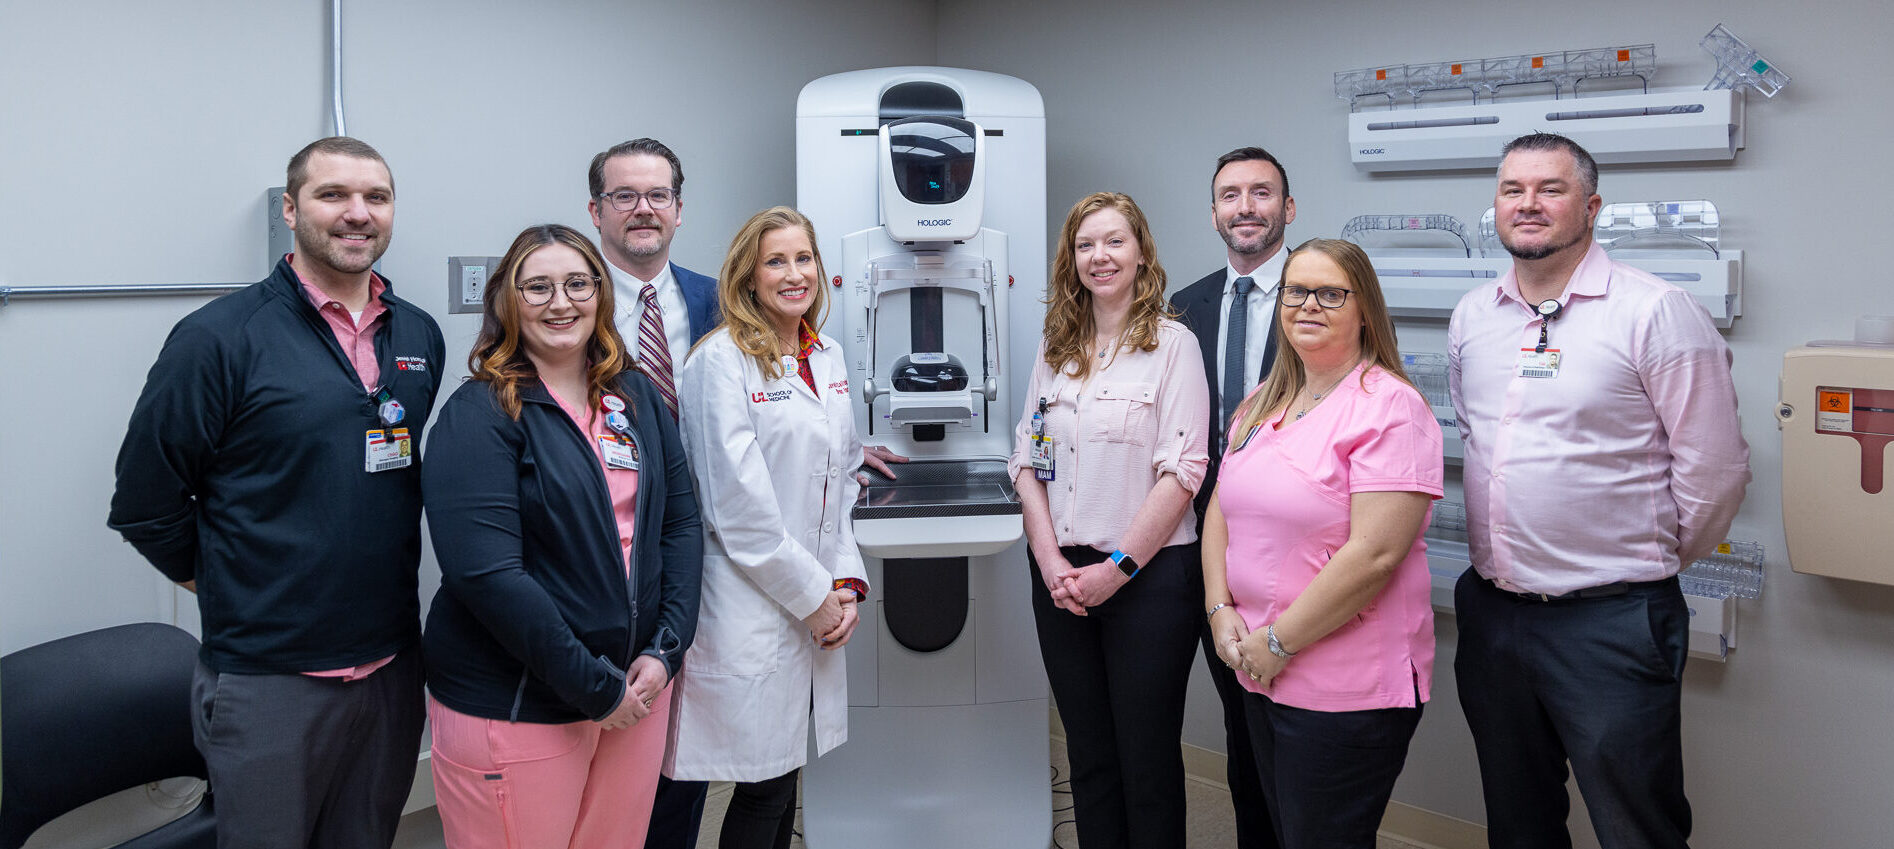 Breast Care Team at UofL Health – Medical Center Northeast posing with new Genius 3D Mammography system.